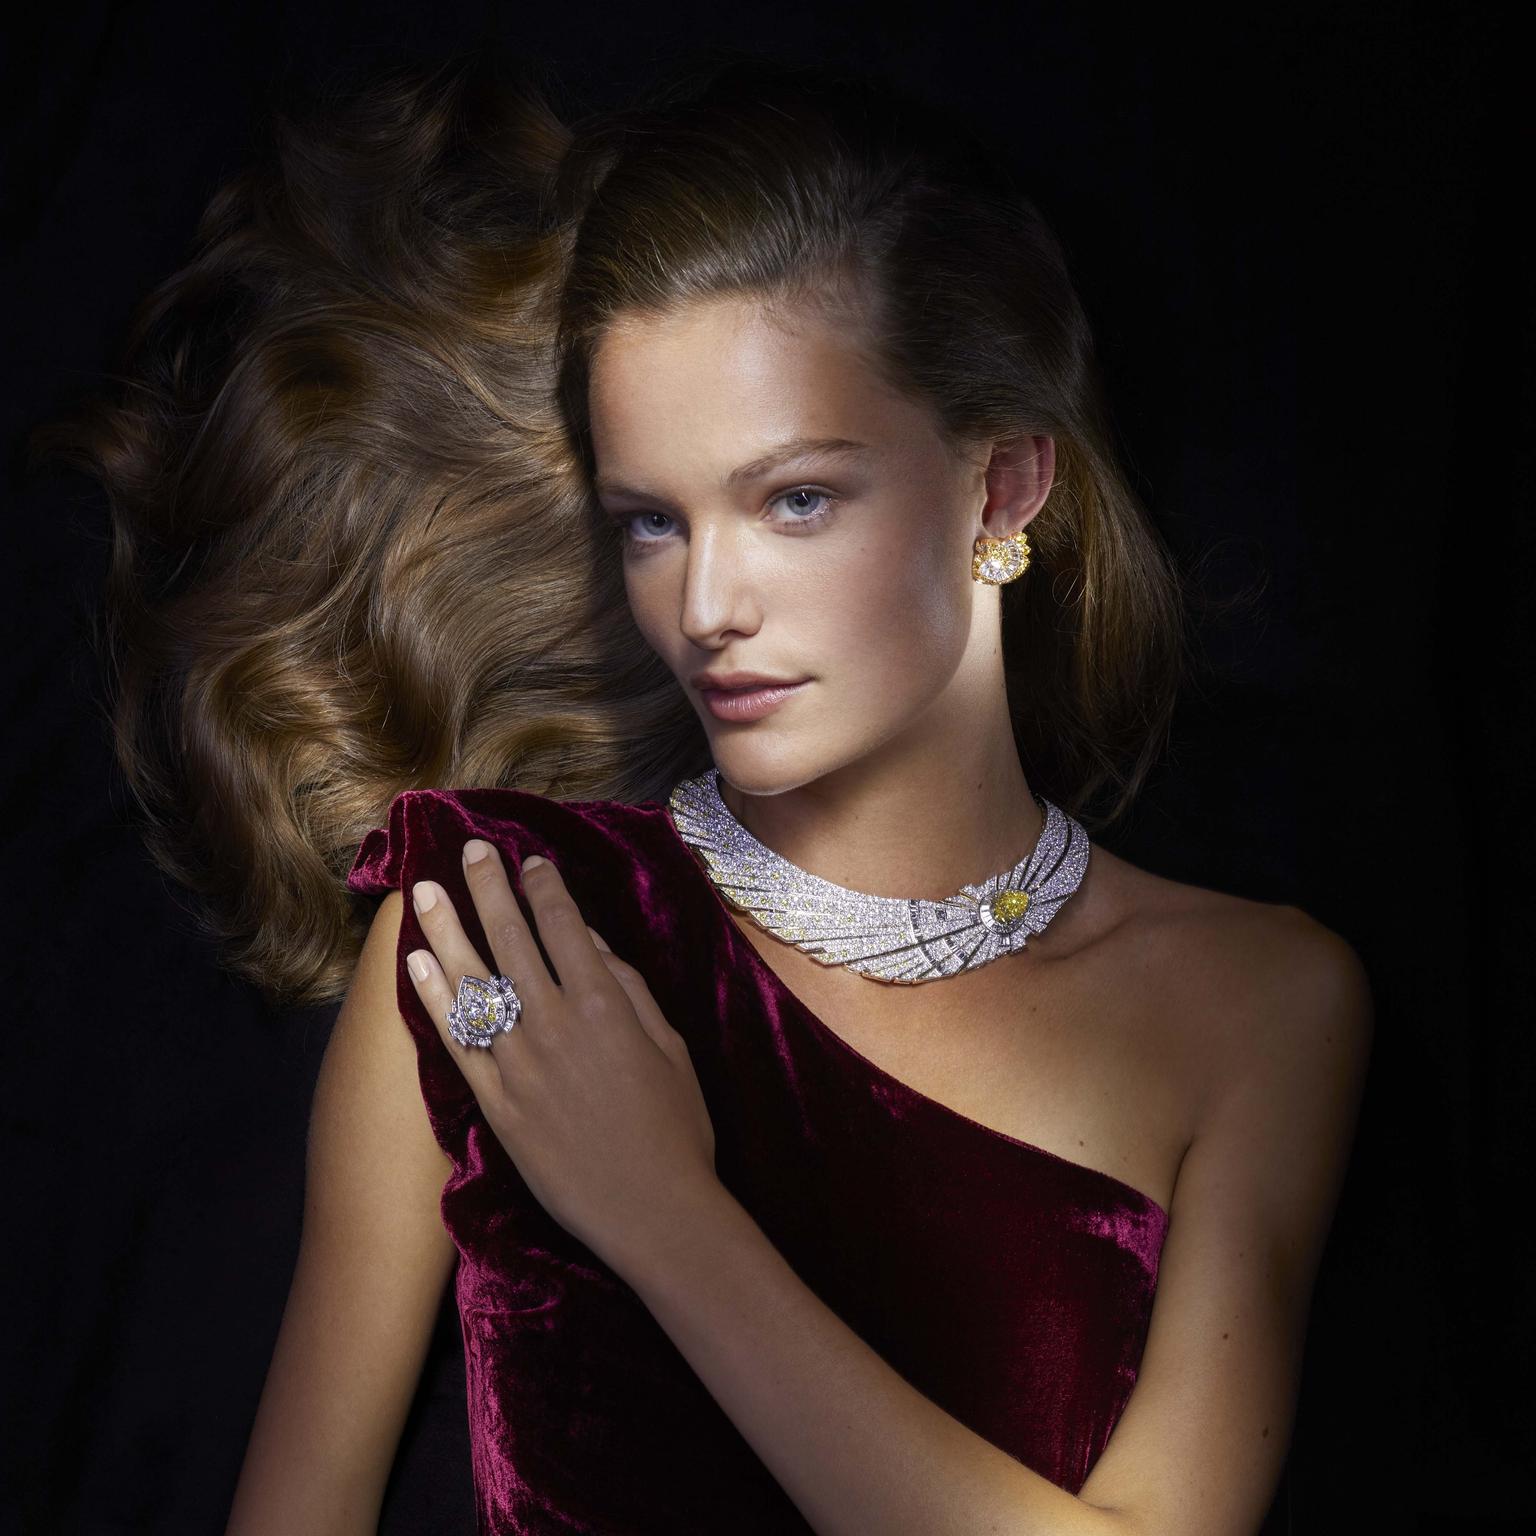 Halley necklace and ring by Van Cleef and Arpels on model